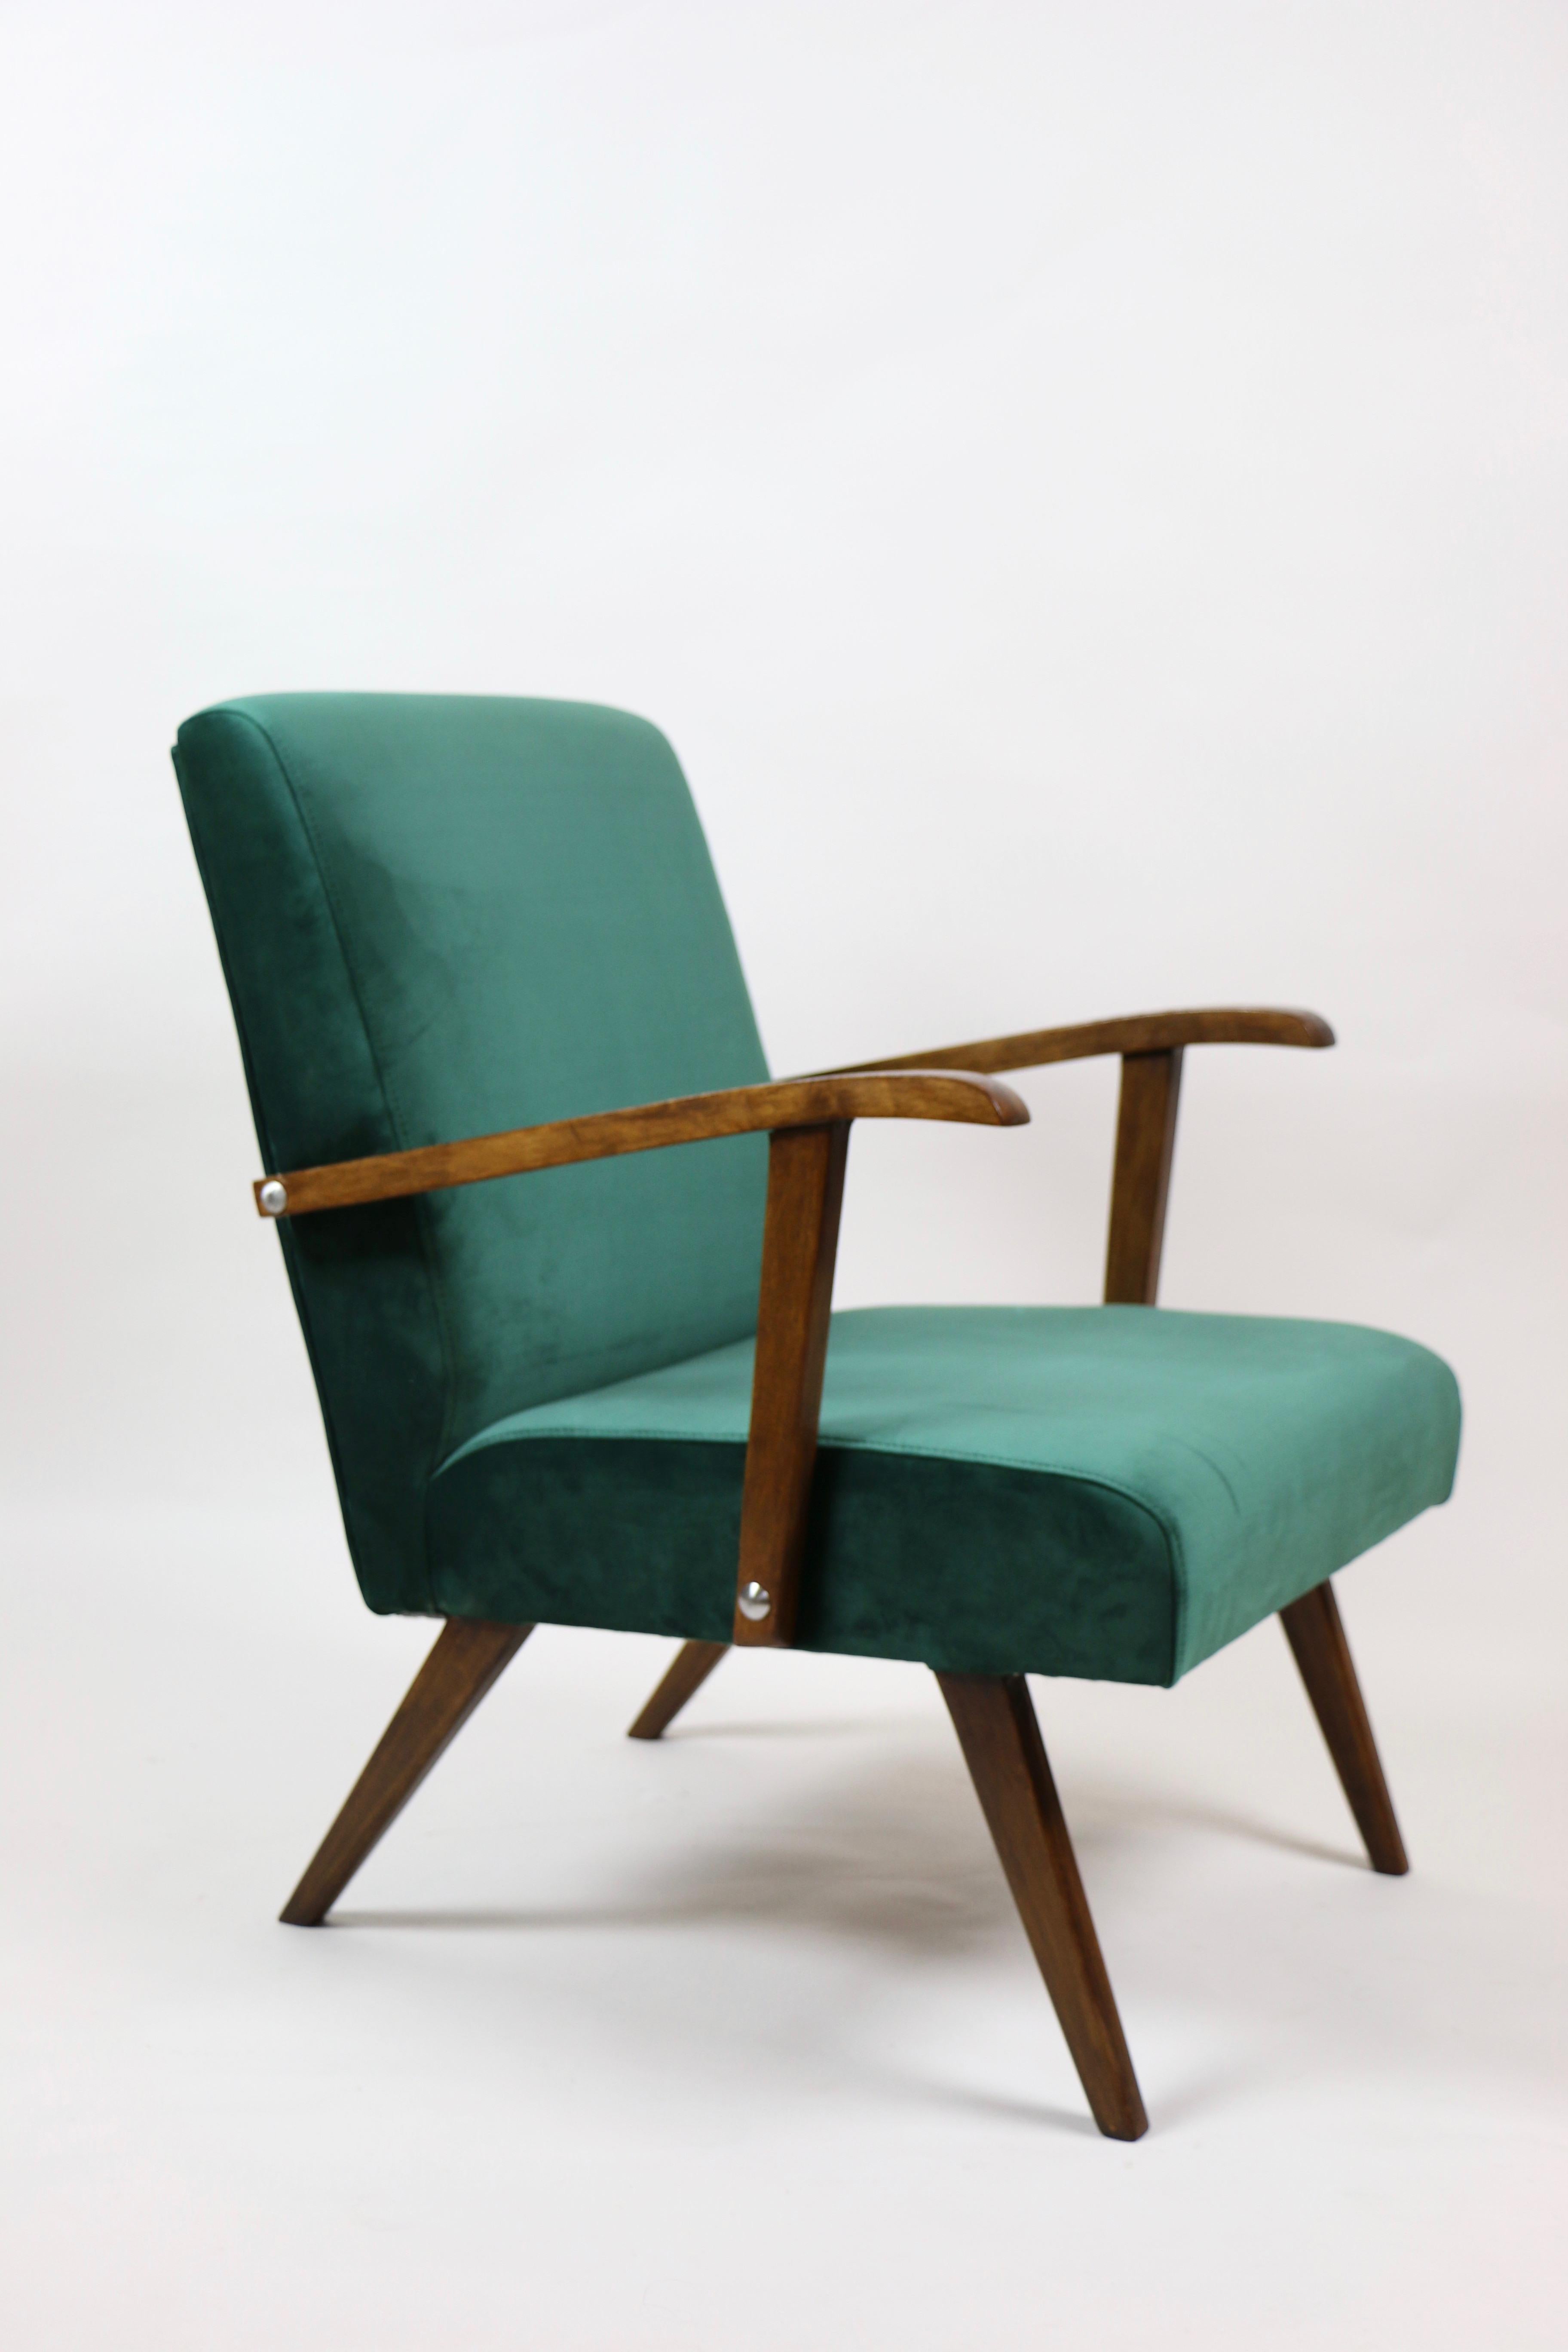 Small vintage club armchair design in green made velvet from 1970s, new upholstery covered with velvet fabric in fashionable green color, finished with wooden chair cushion. Wooden elements in dark oak color. Perfect condition. This model is one of